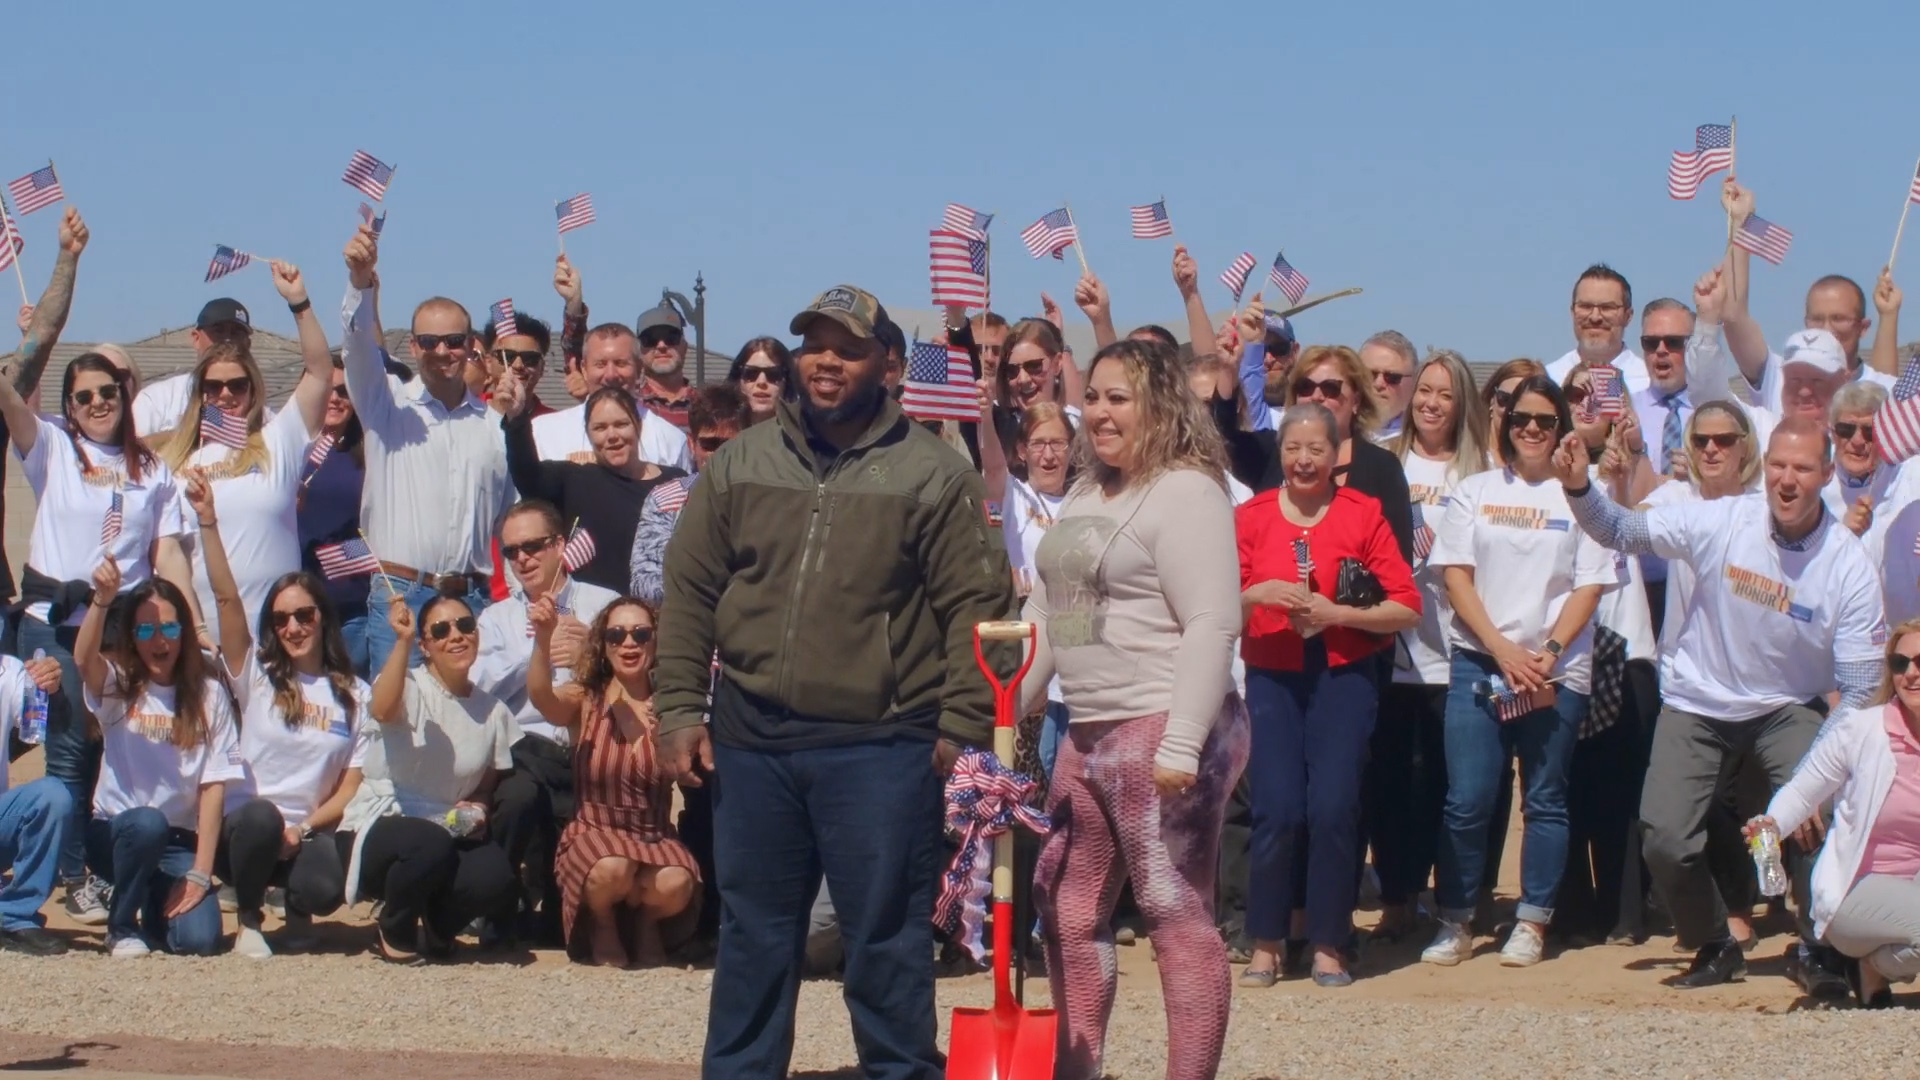 In an emotional surprise reveal event, United States Army Sergeant William McCoy learned that he will be the recipient of a brand-new mortgage-free Centex home, awarded through PulteGroup’s Built to Honor® program.